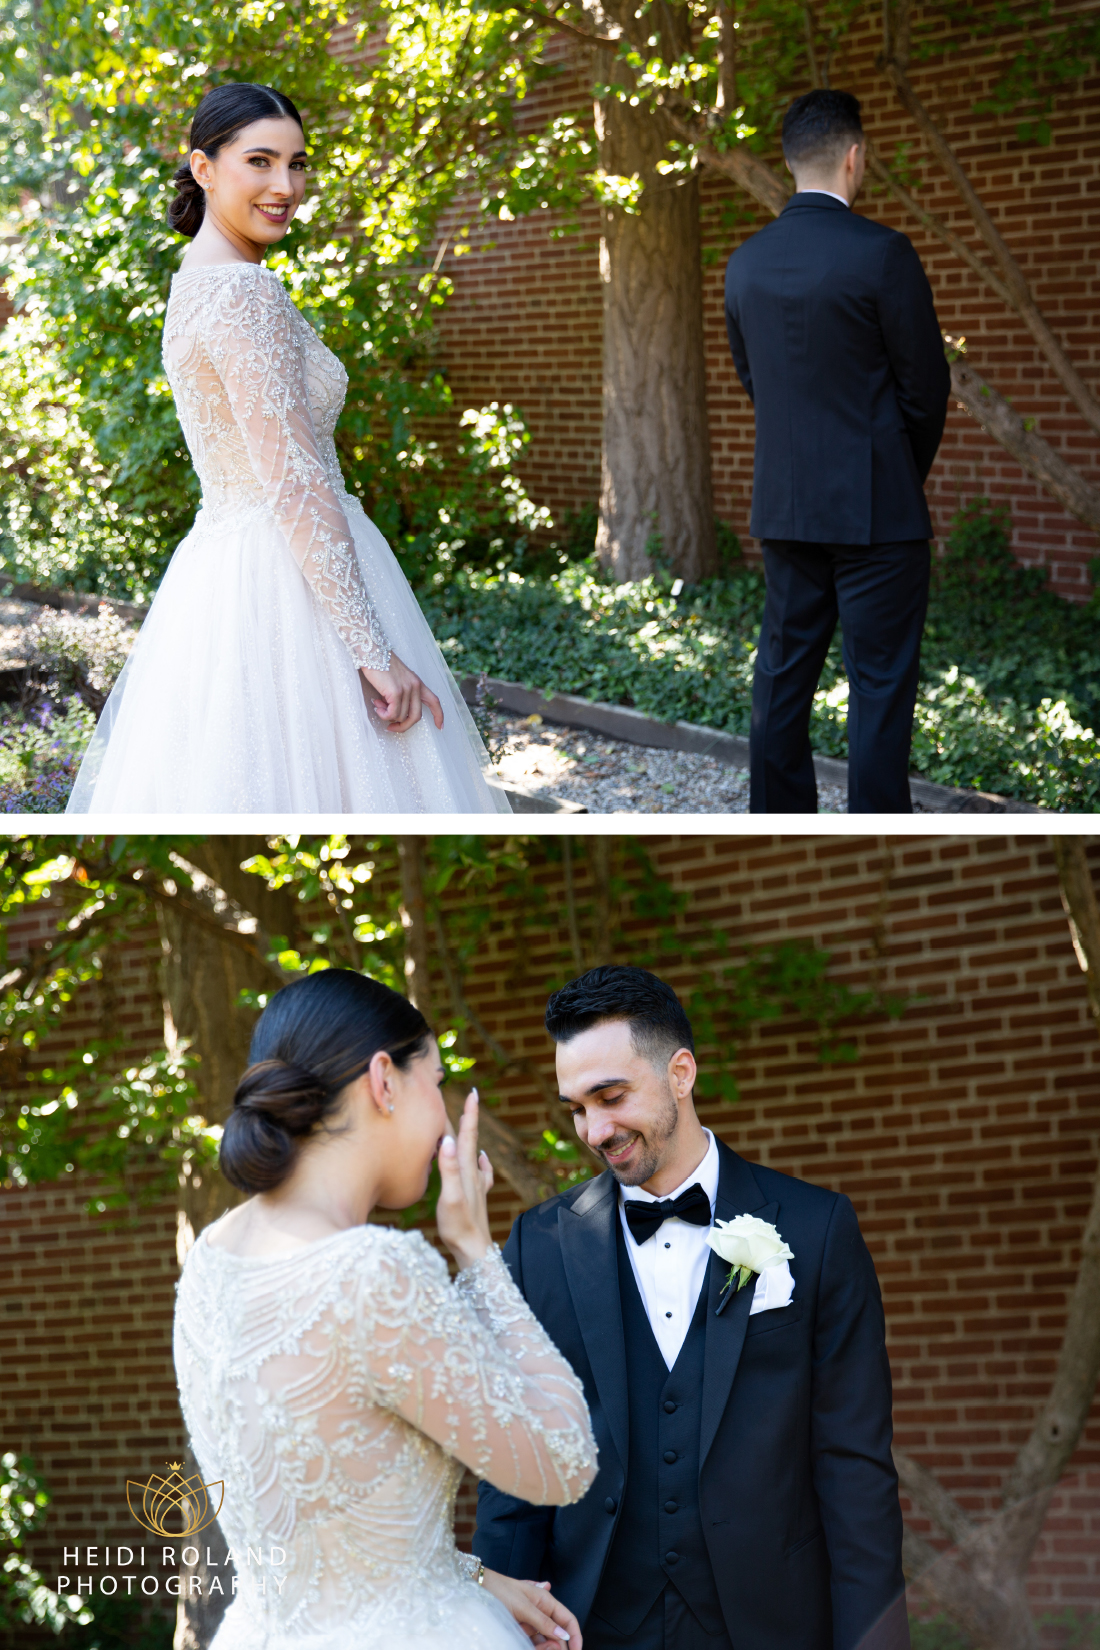 Bride and Groom first look in 18th century garden in Old City Philadelphia